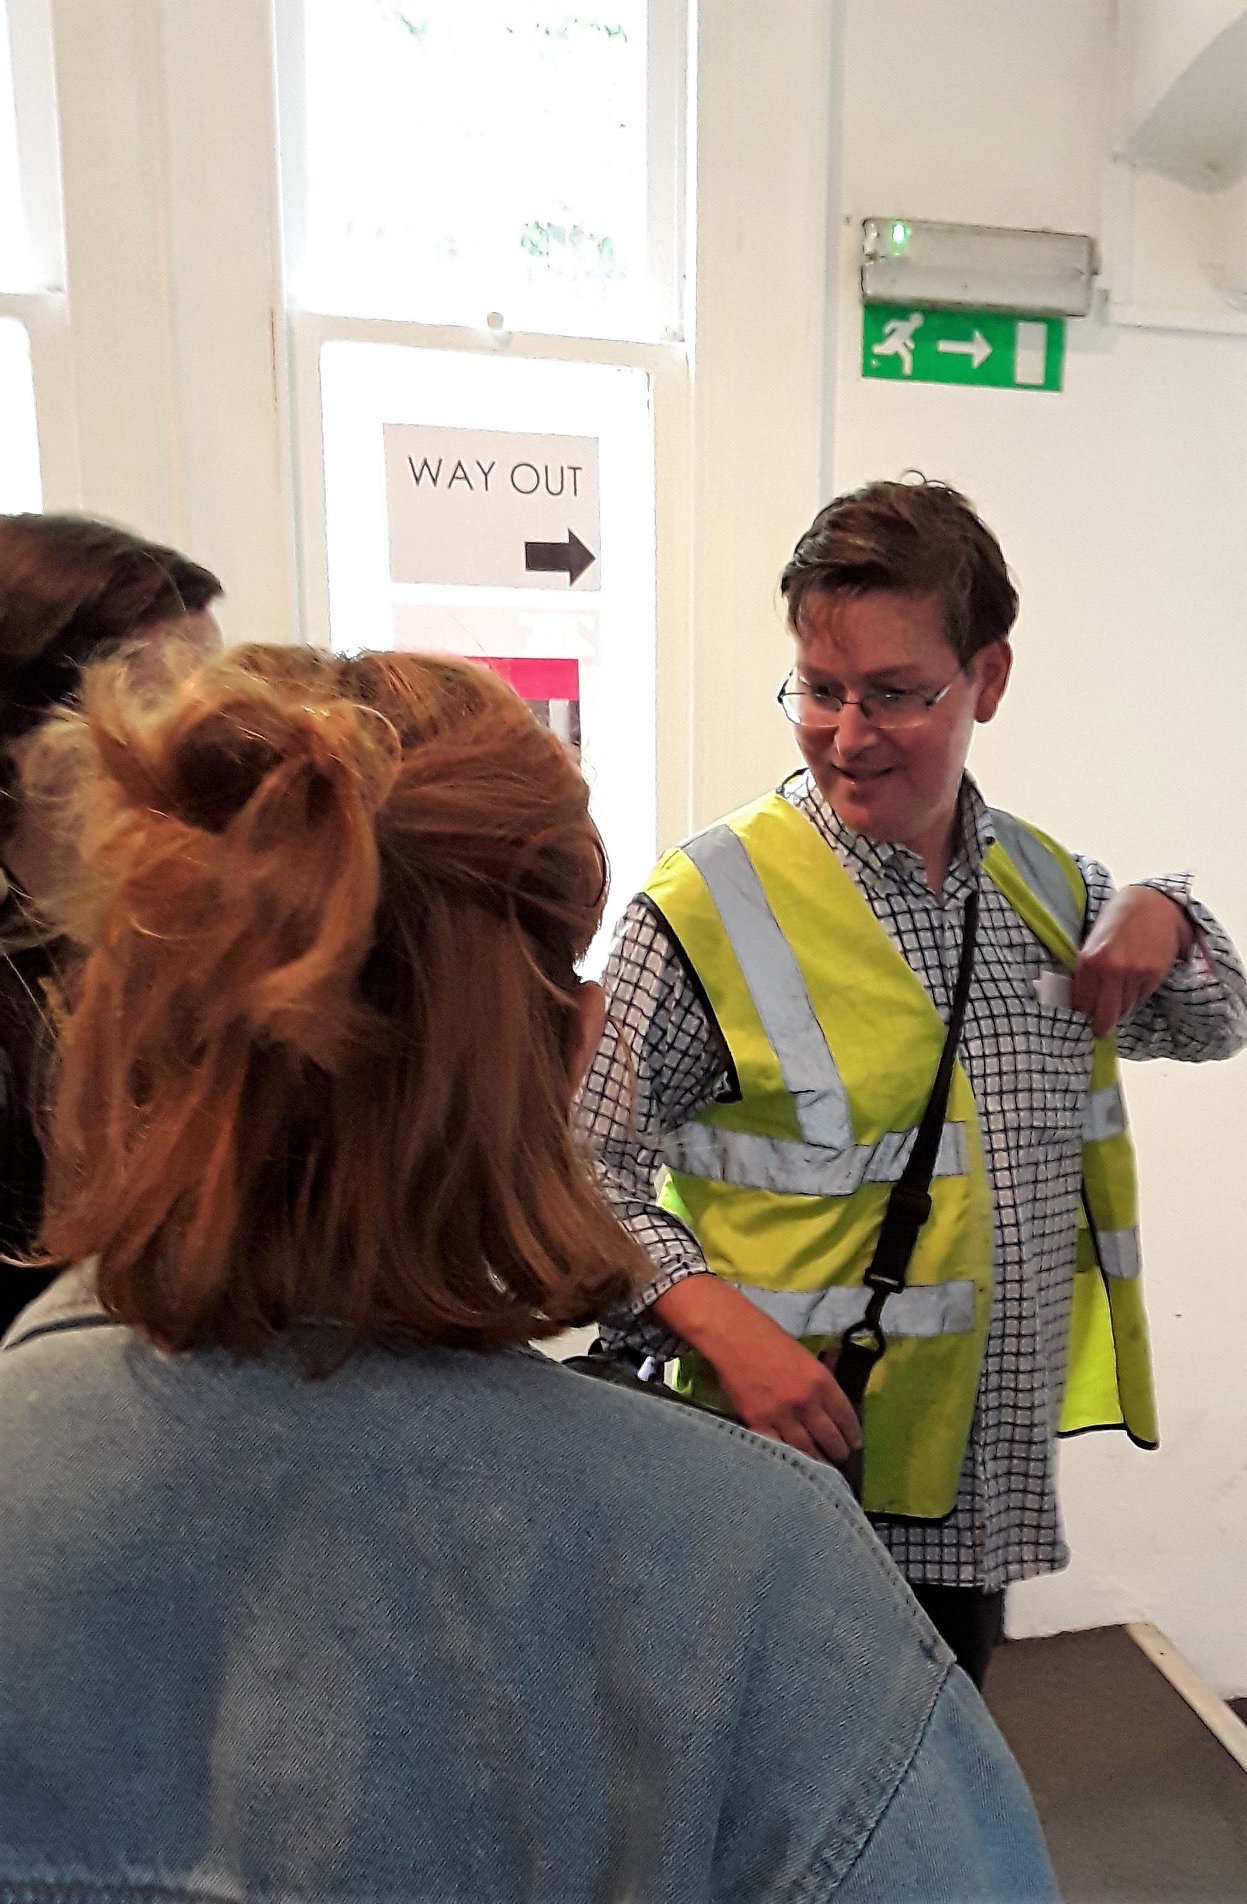 Man in high
visibility jacket takes people on a tour out of the building